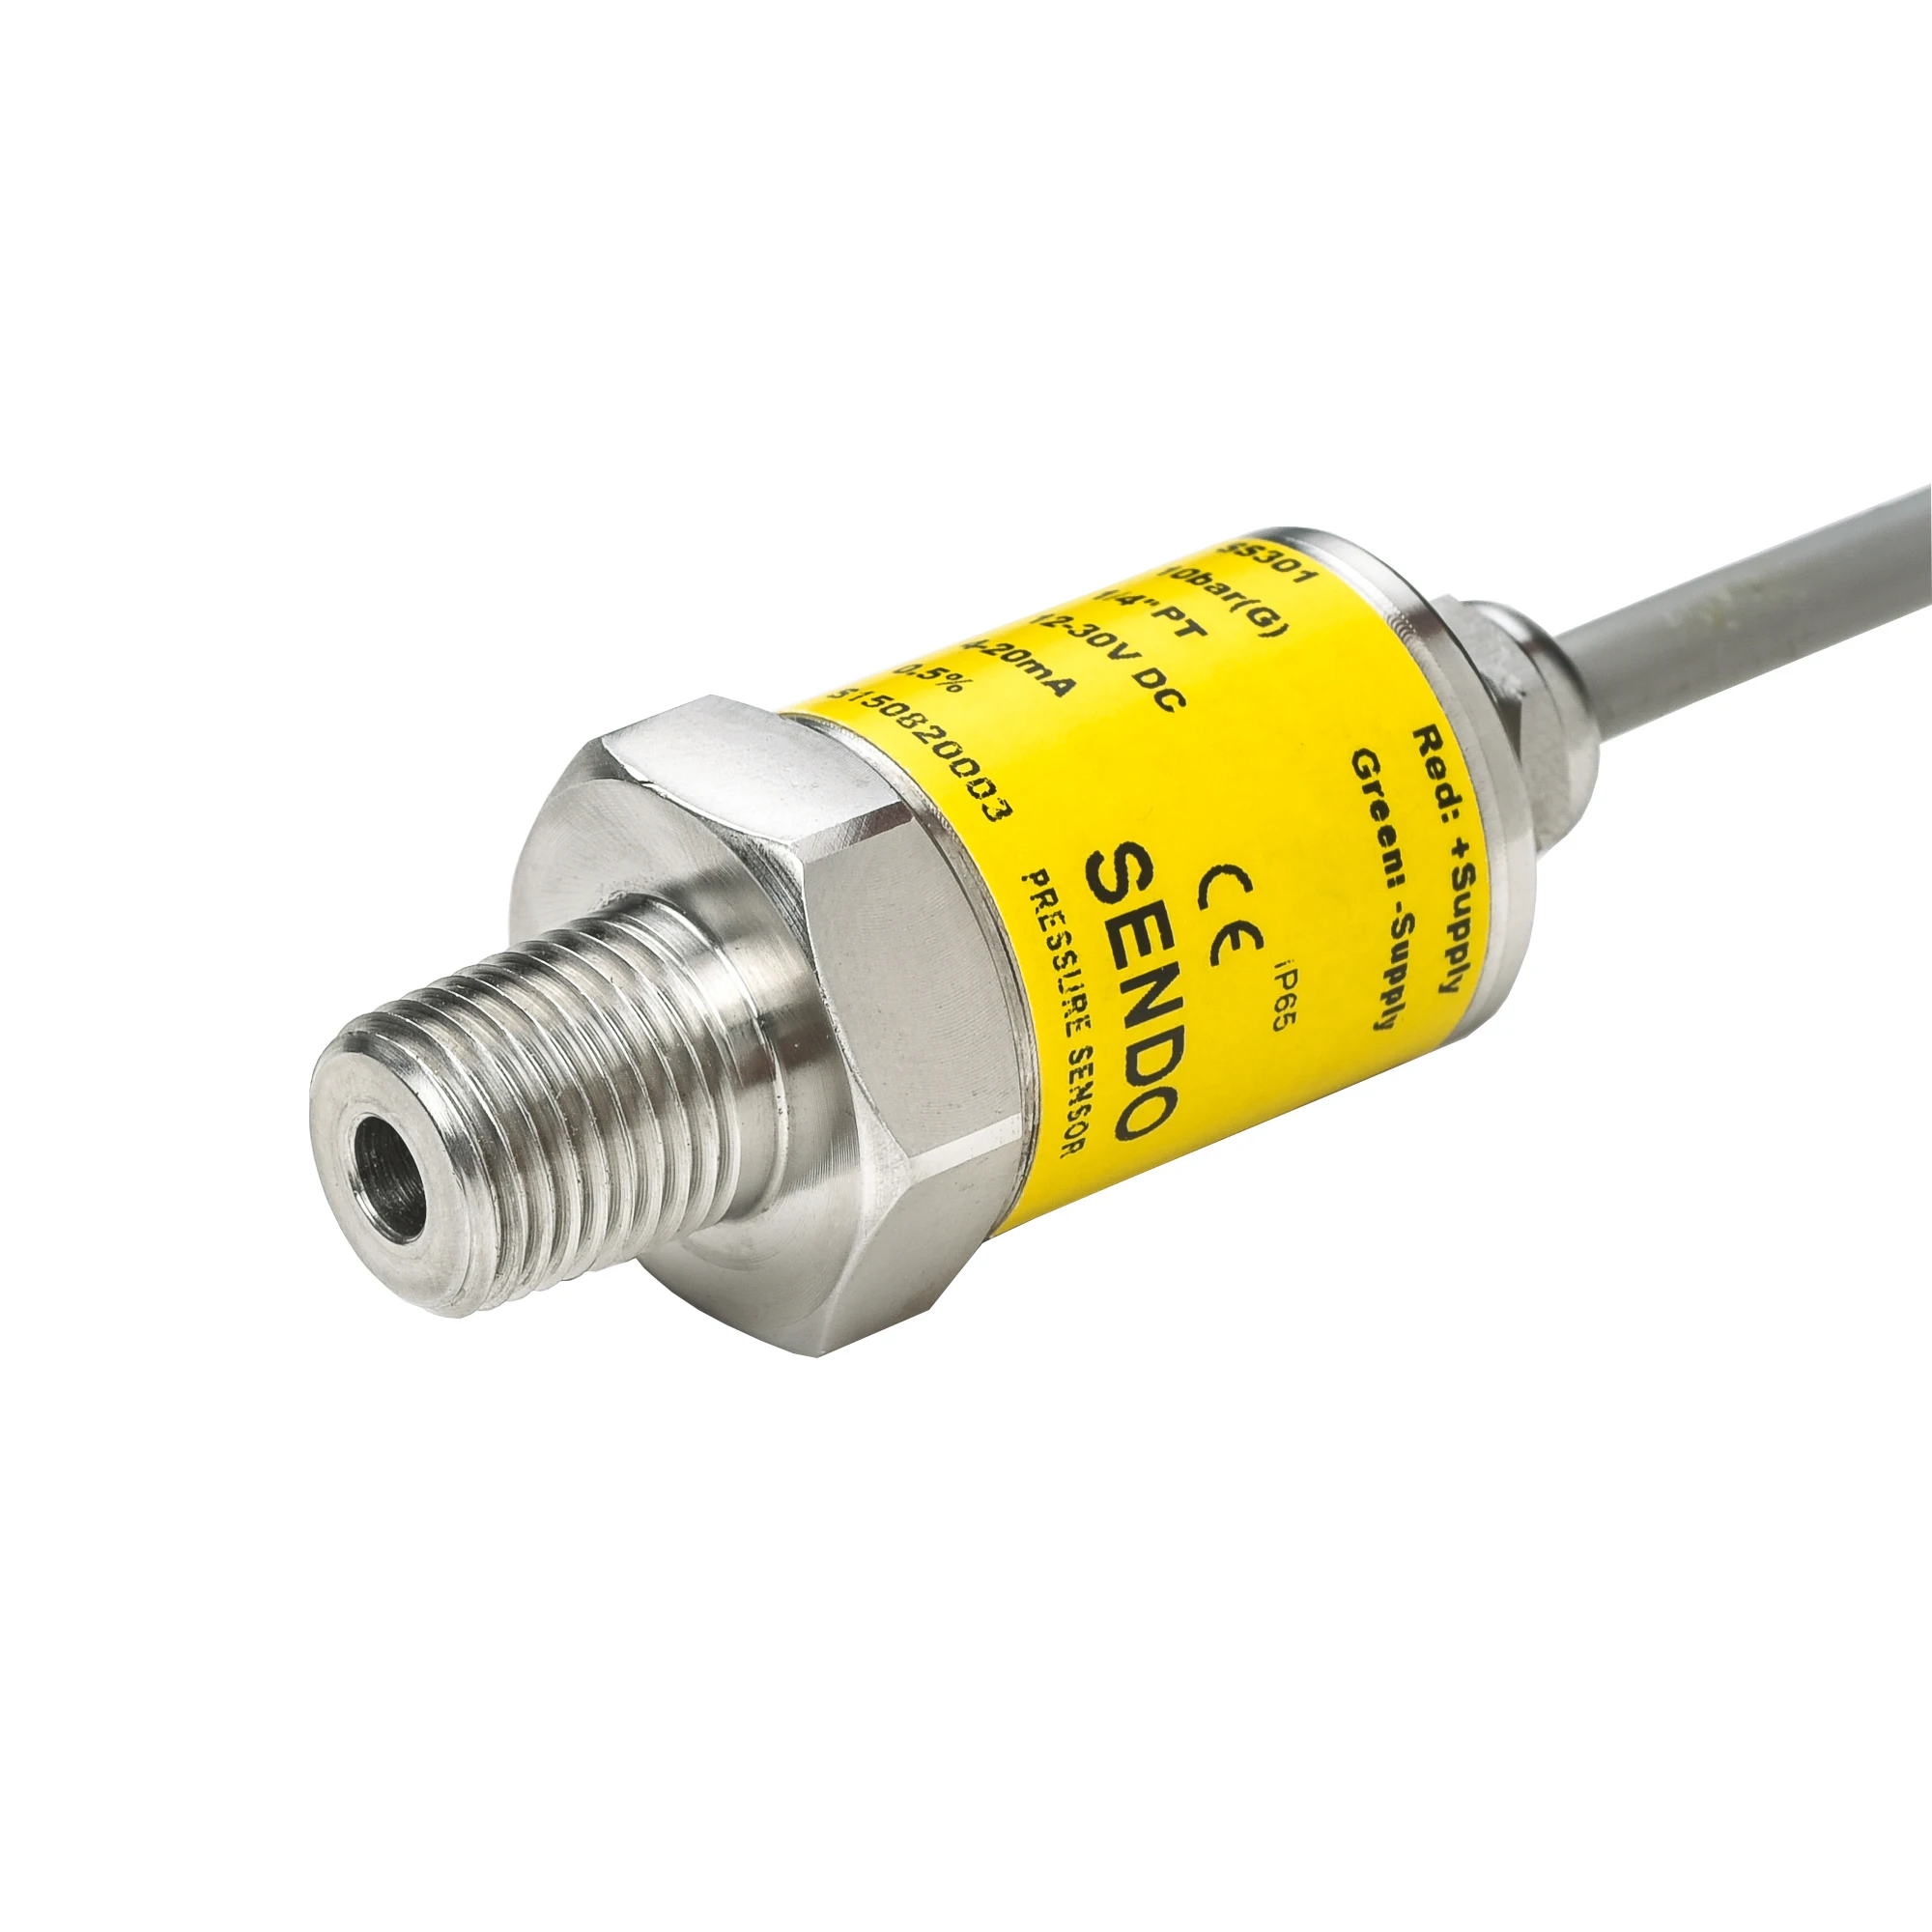 1/2 NPT-M Conduit and 36 Cable Electrical Termination 1/4 NPT Male Connection 4-20mA Output Signal 0/100 psi Pressure Range +/-1% TC Accuracy Ashcroft Industrial Type K1 Proven and Versatile Pressure Transmitter 